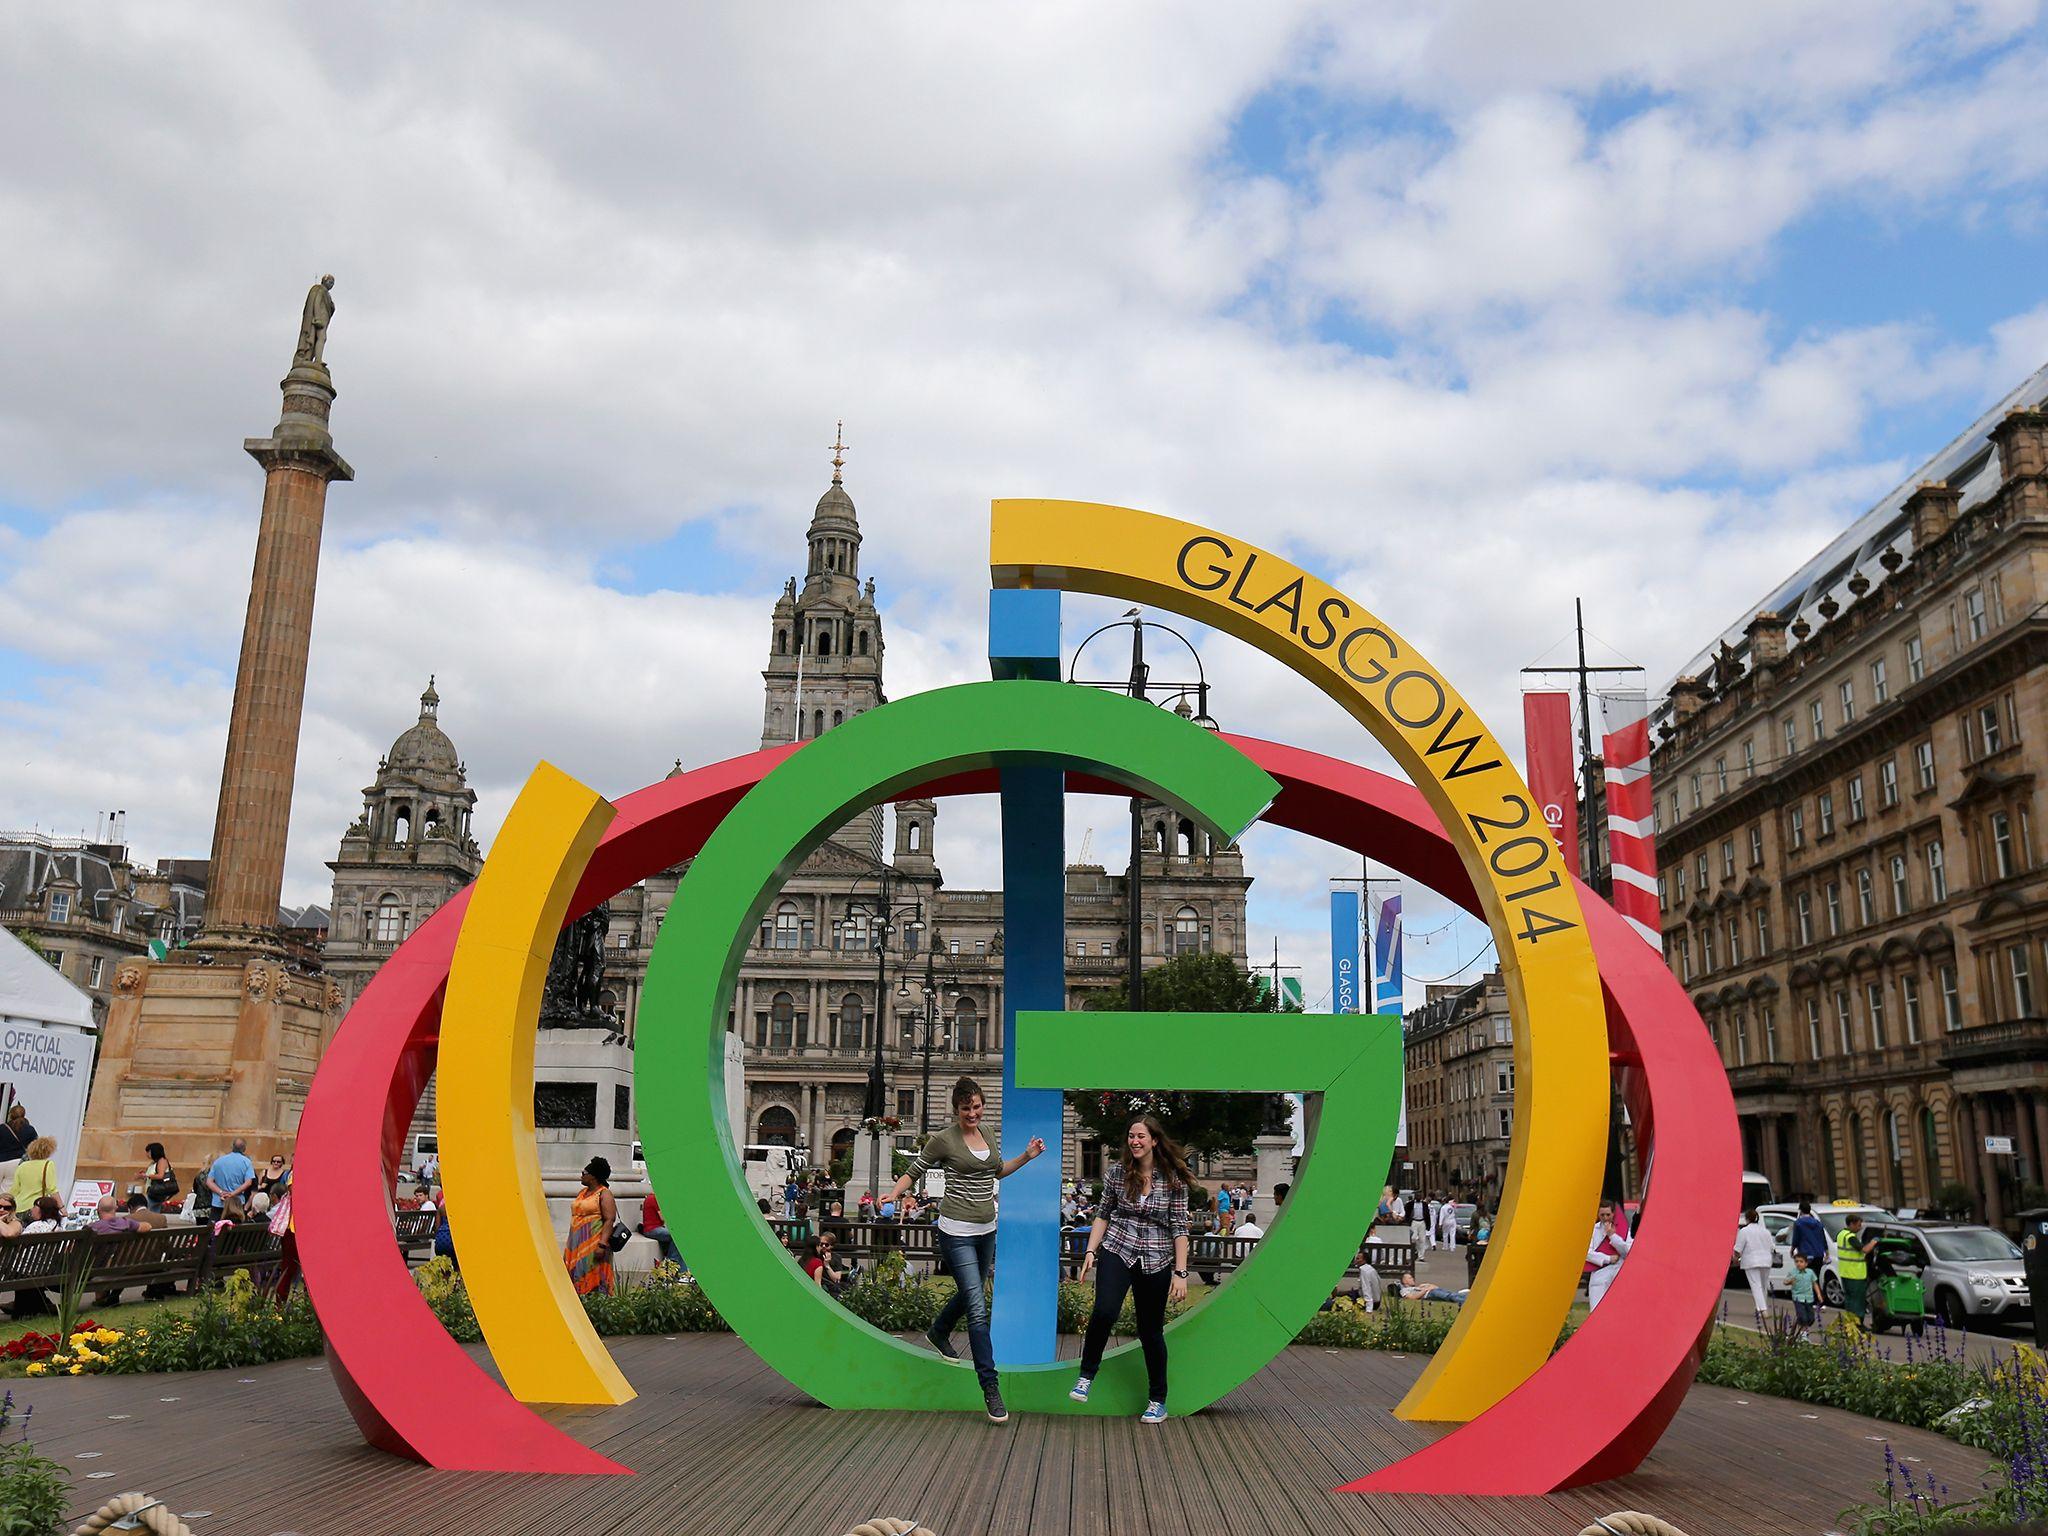 Commonwealth Games Wallpaper, Commonwealth Games Wallpaper